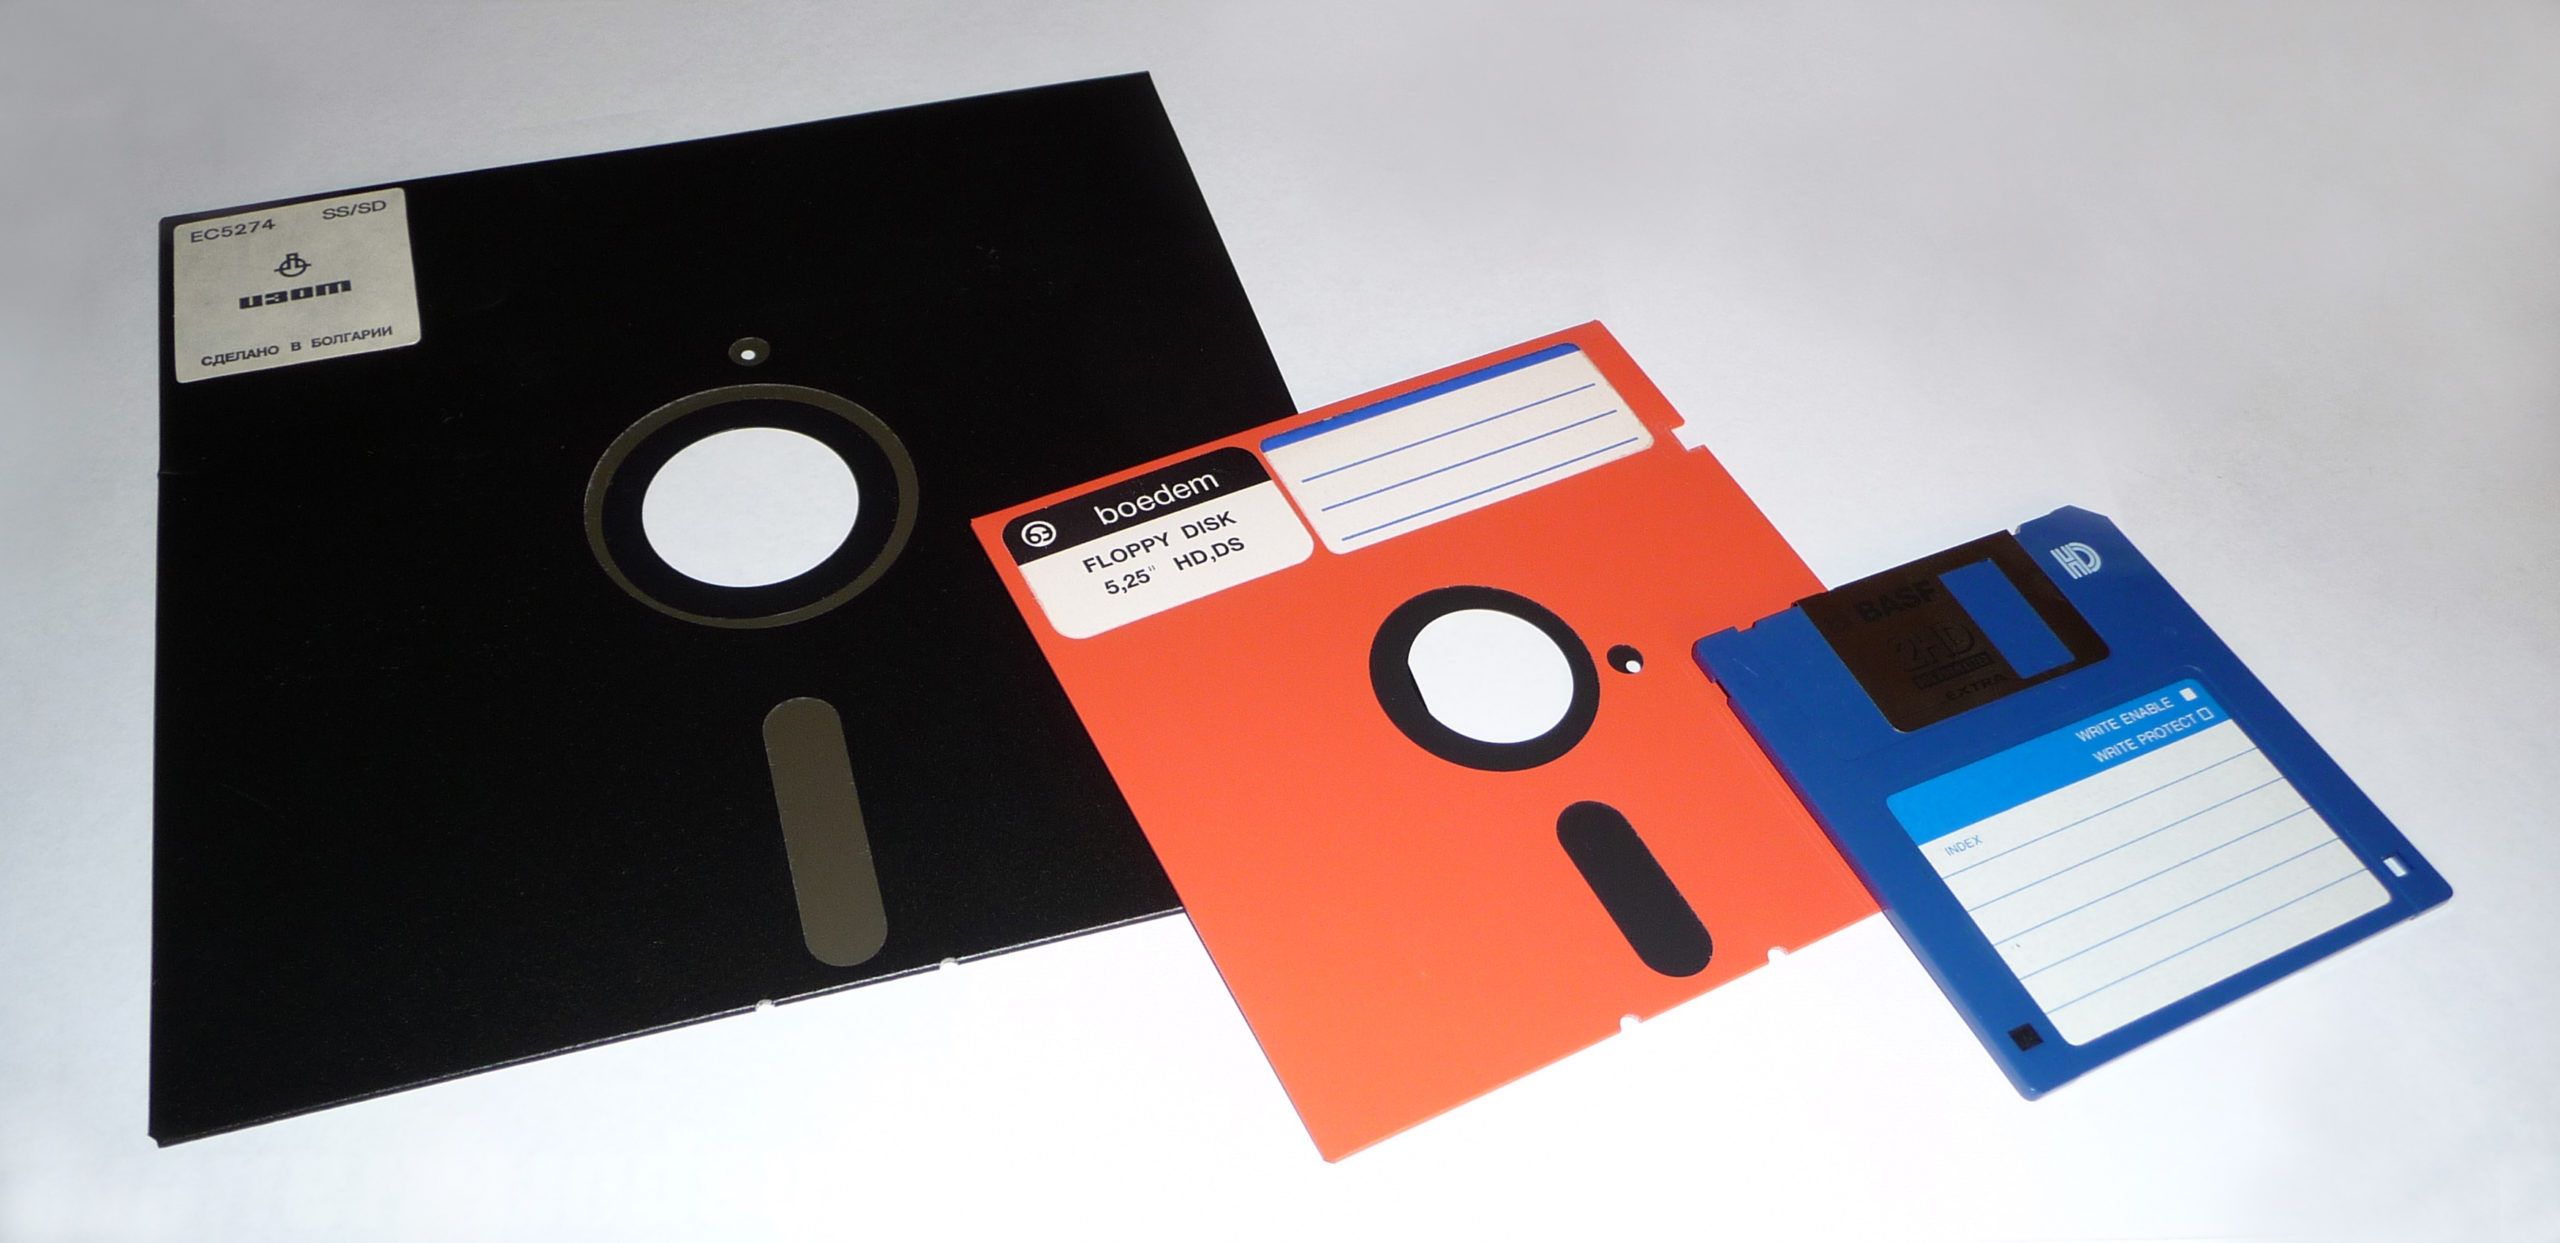 22 Obsolete Technologies That People Thought Would Last Forever